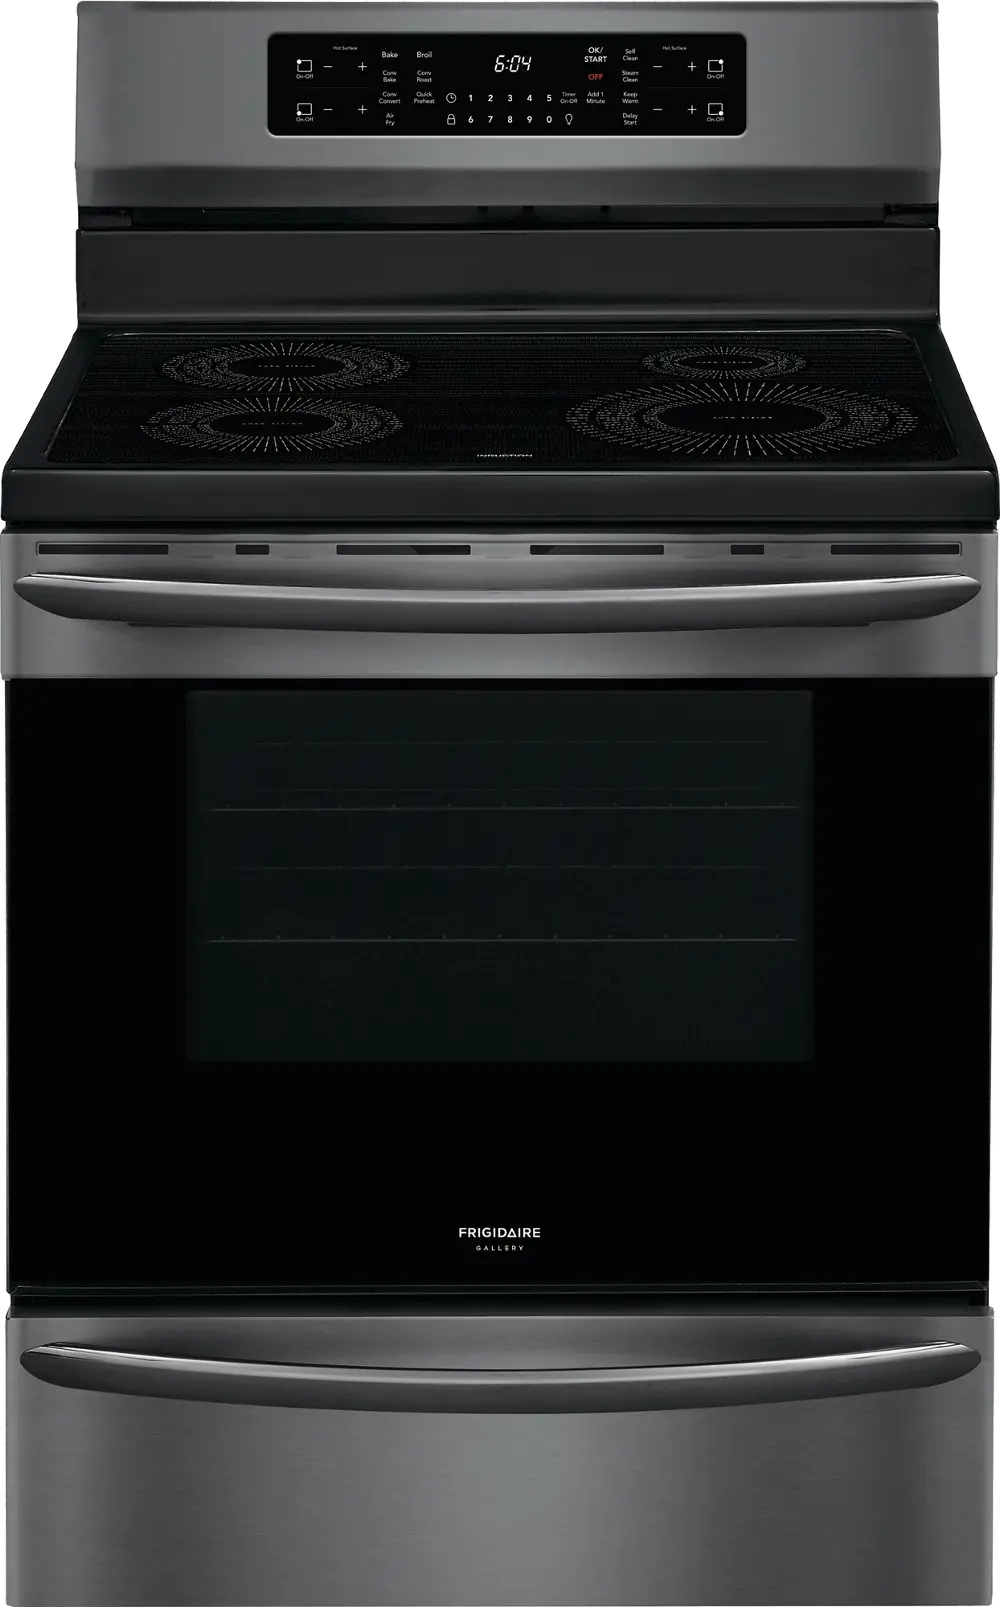 GCRI3058AD Frigidaire Gallery 5.4 cu ft Induction Range - Black Stainless Steel-1